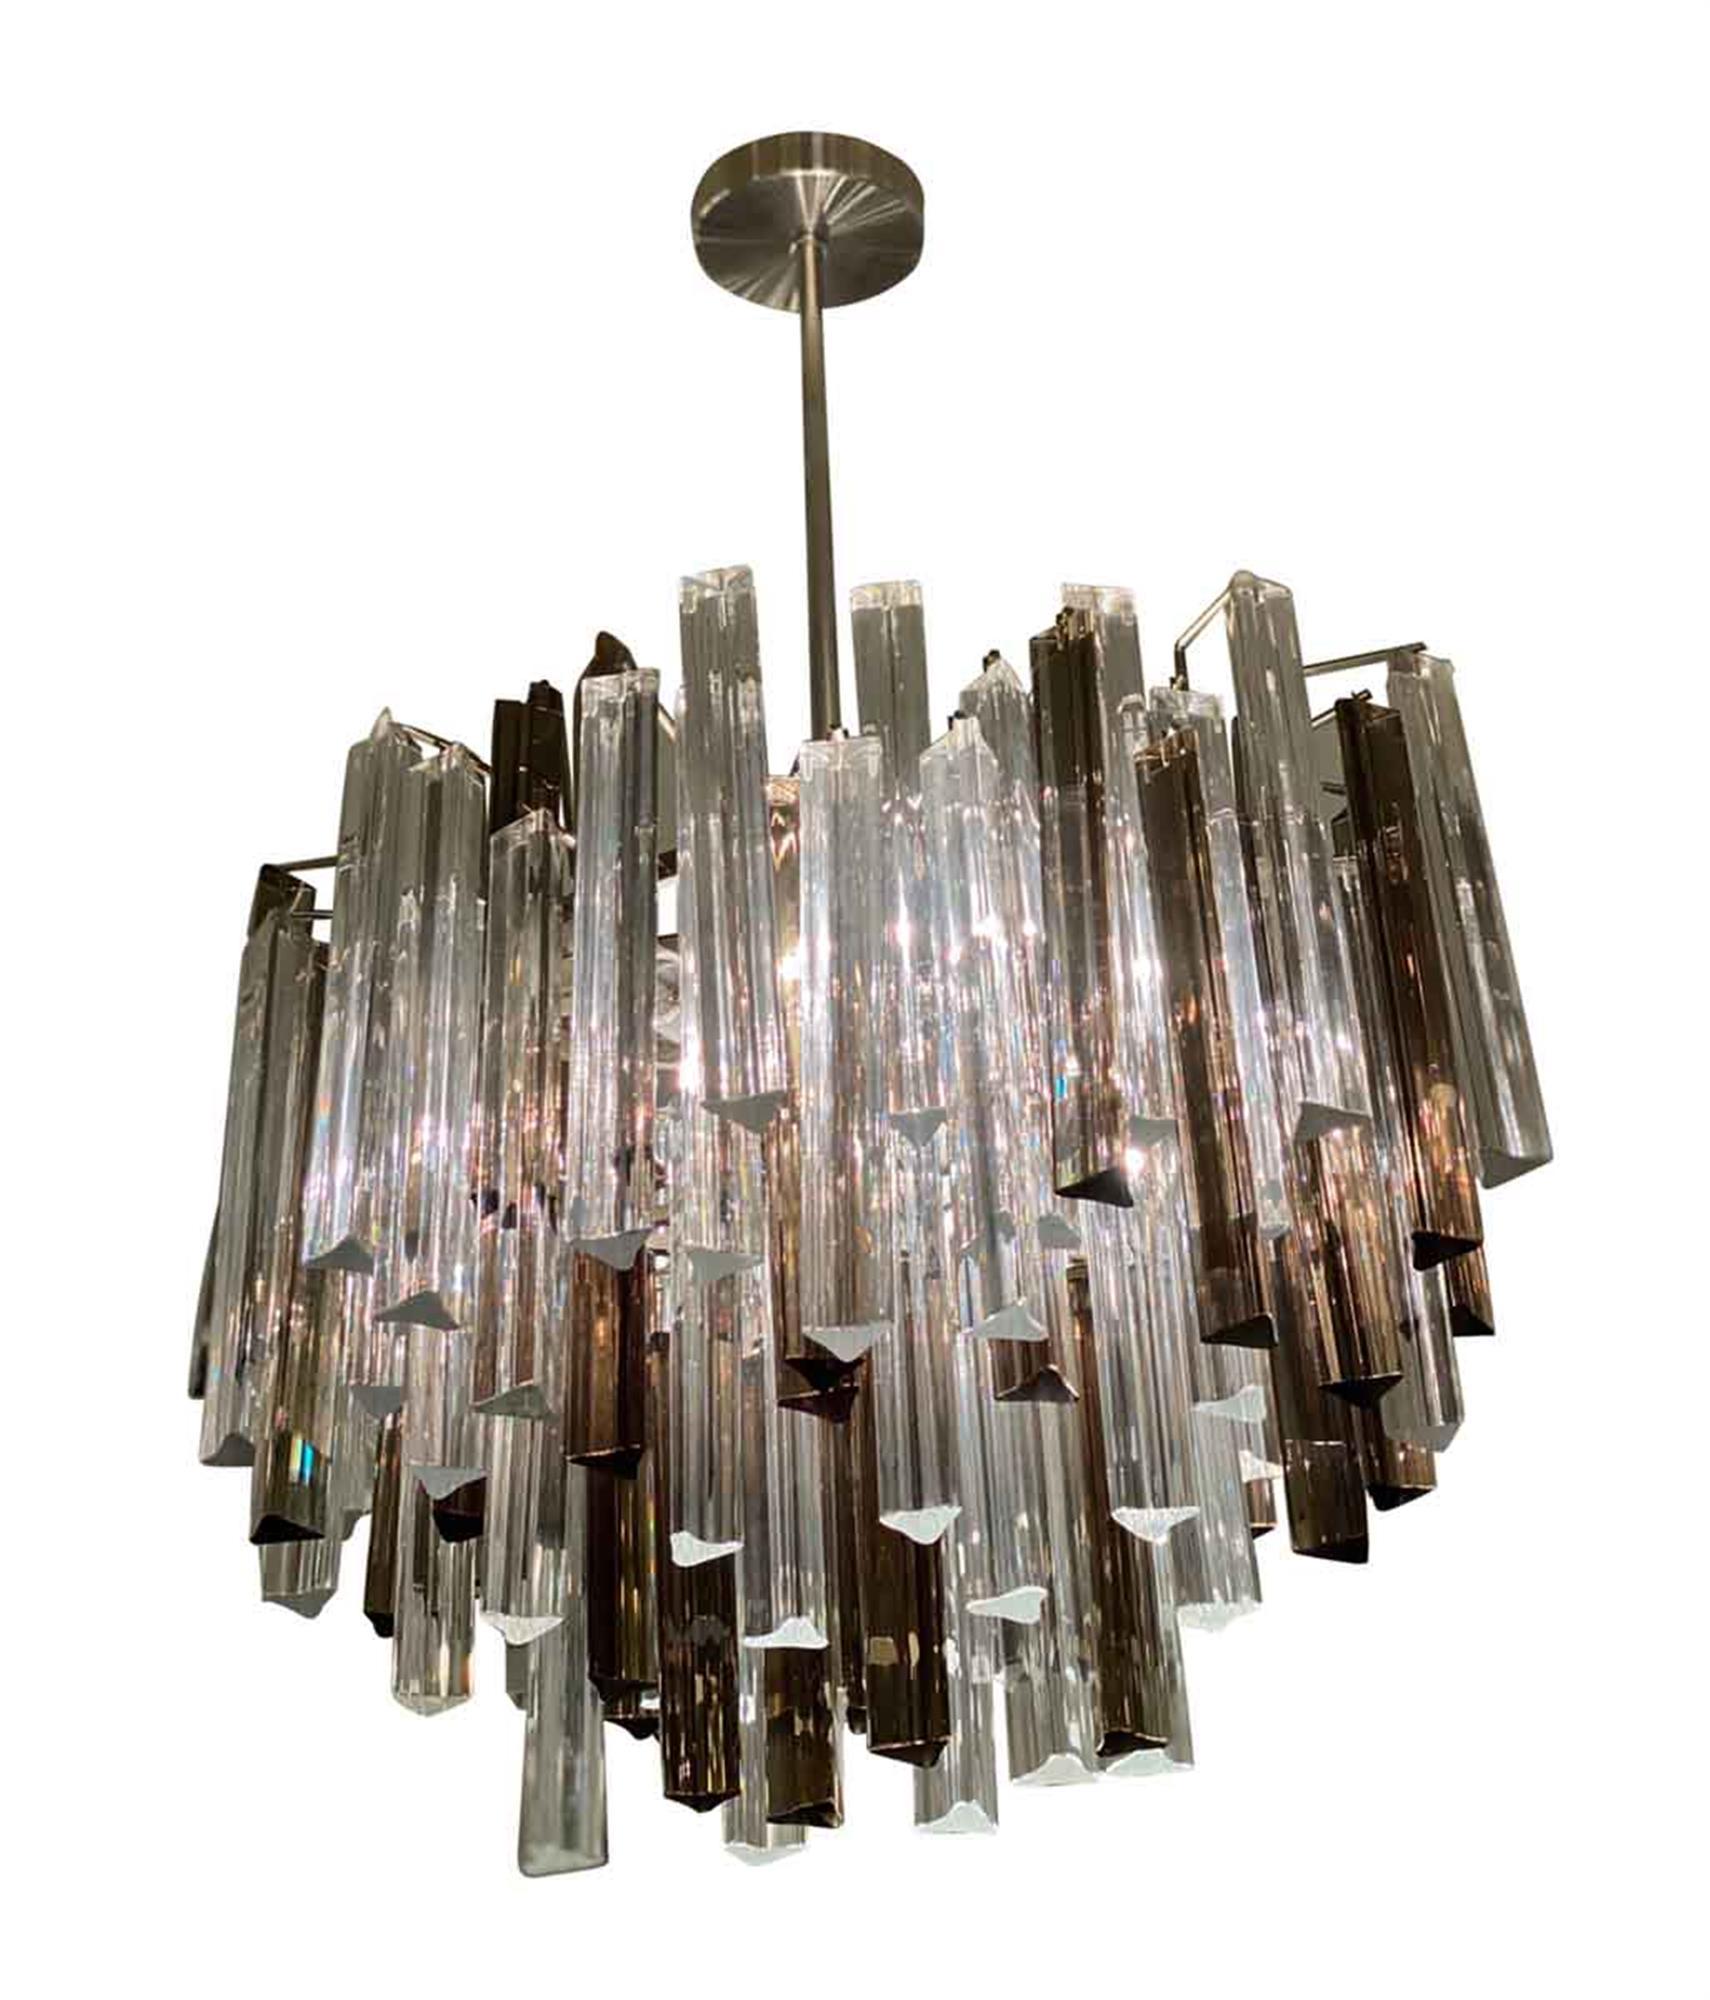 Offered is a 1970s Camer glass chandelier by Venini. This midcentury chandelier has both clear and smoked glass prisms, which are arranged in various levels to add to its prism light display. The canopy and pole are nickel. This is designed in an